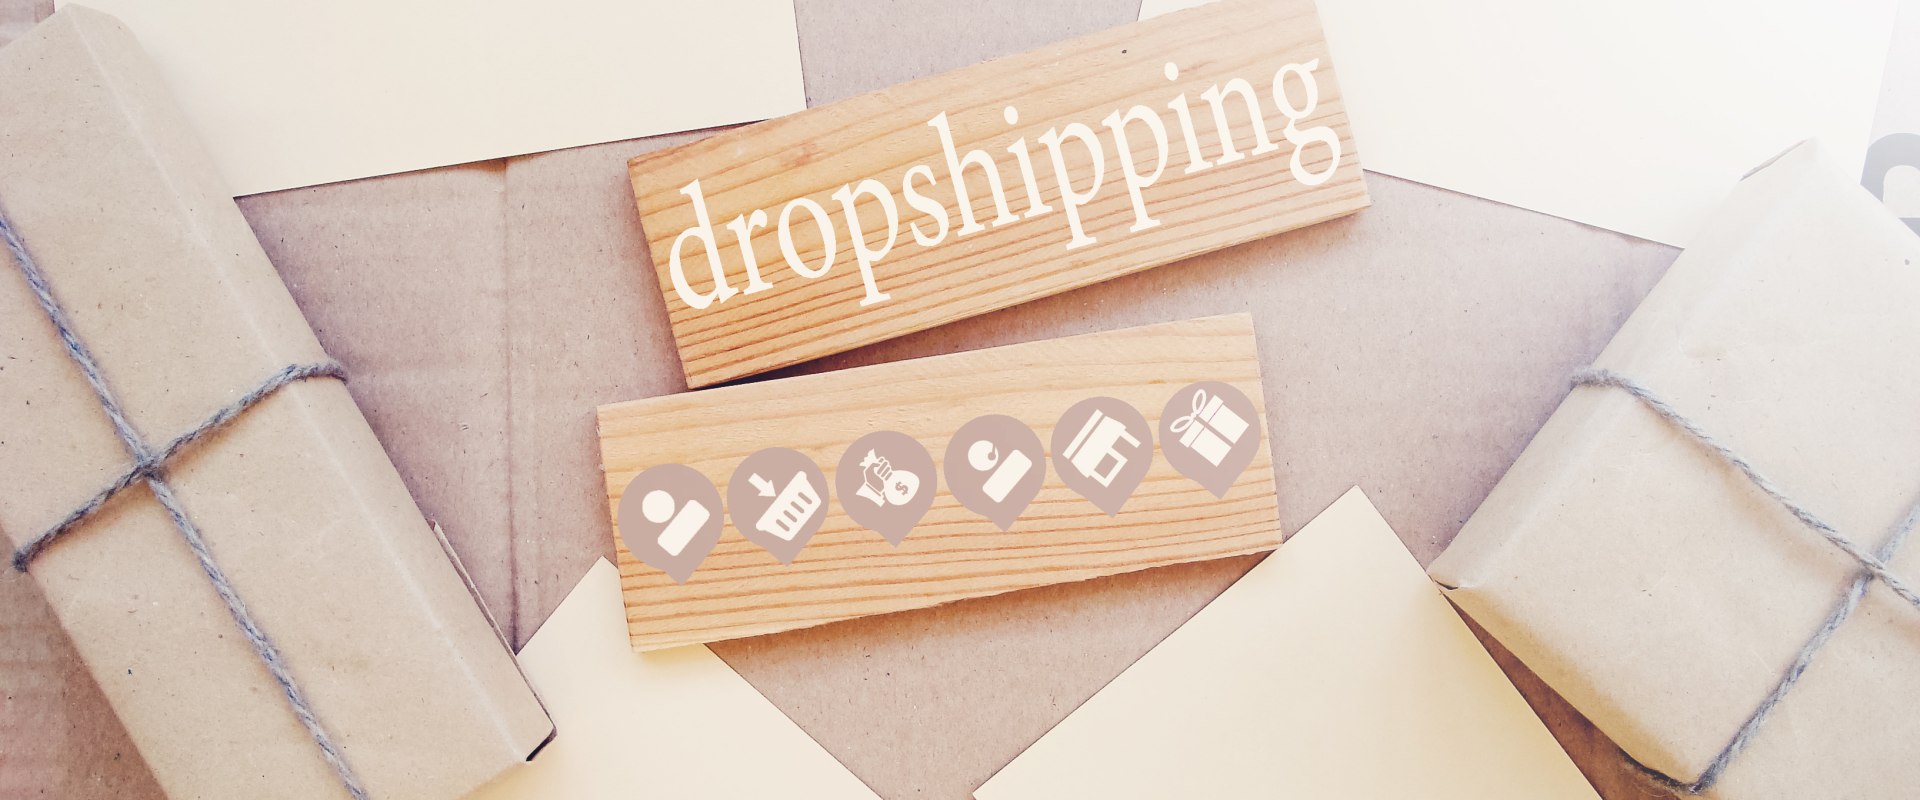 Starting a Dropshipping Business with No Money: A Step-by-Step Guide